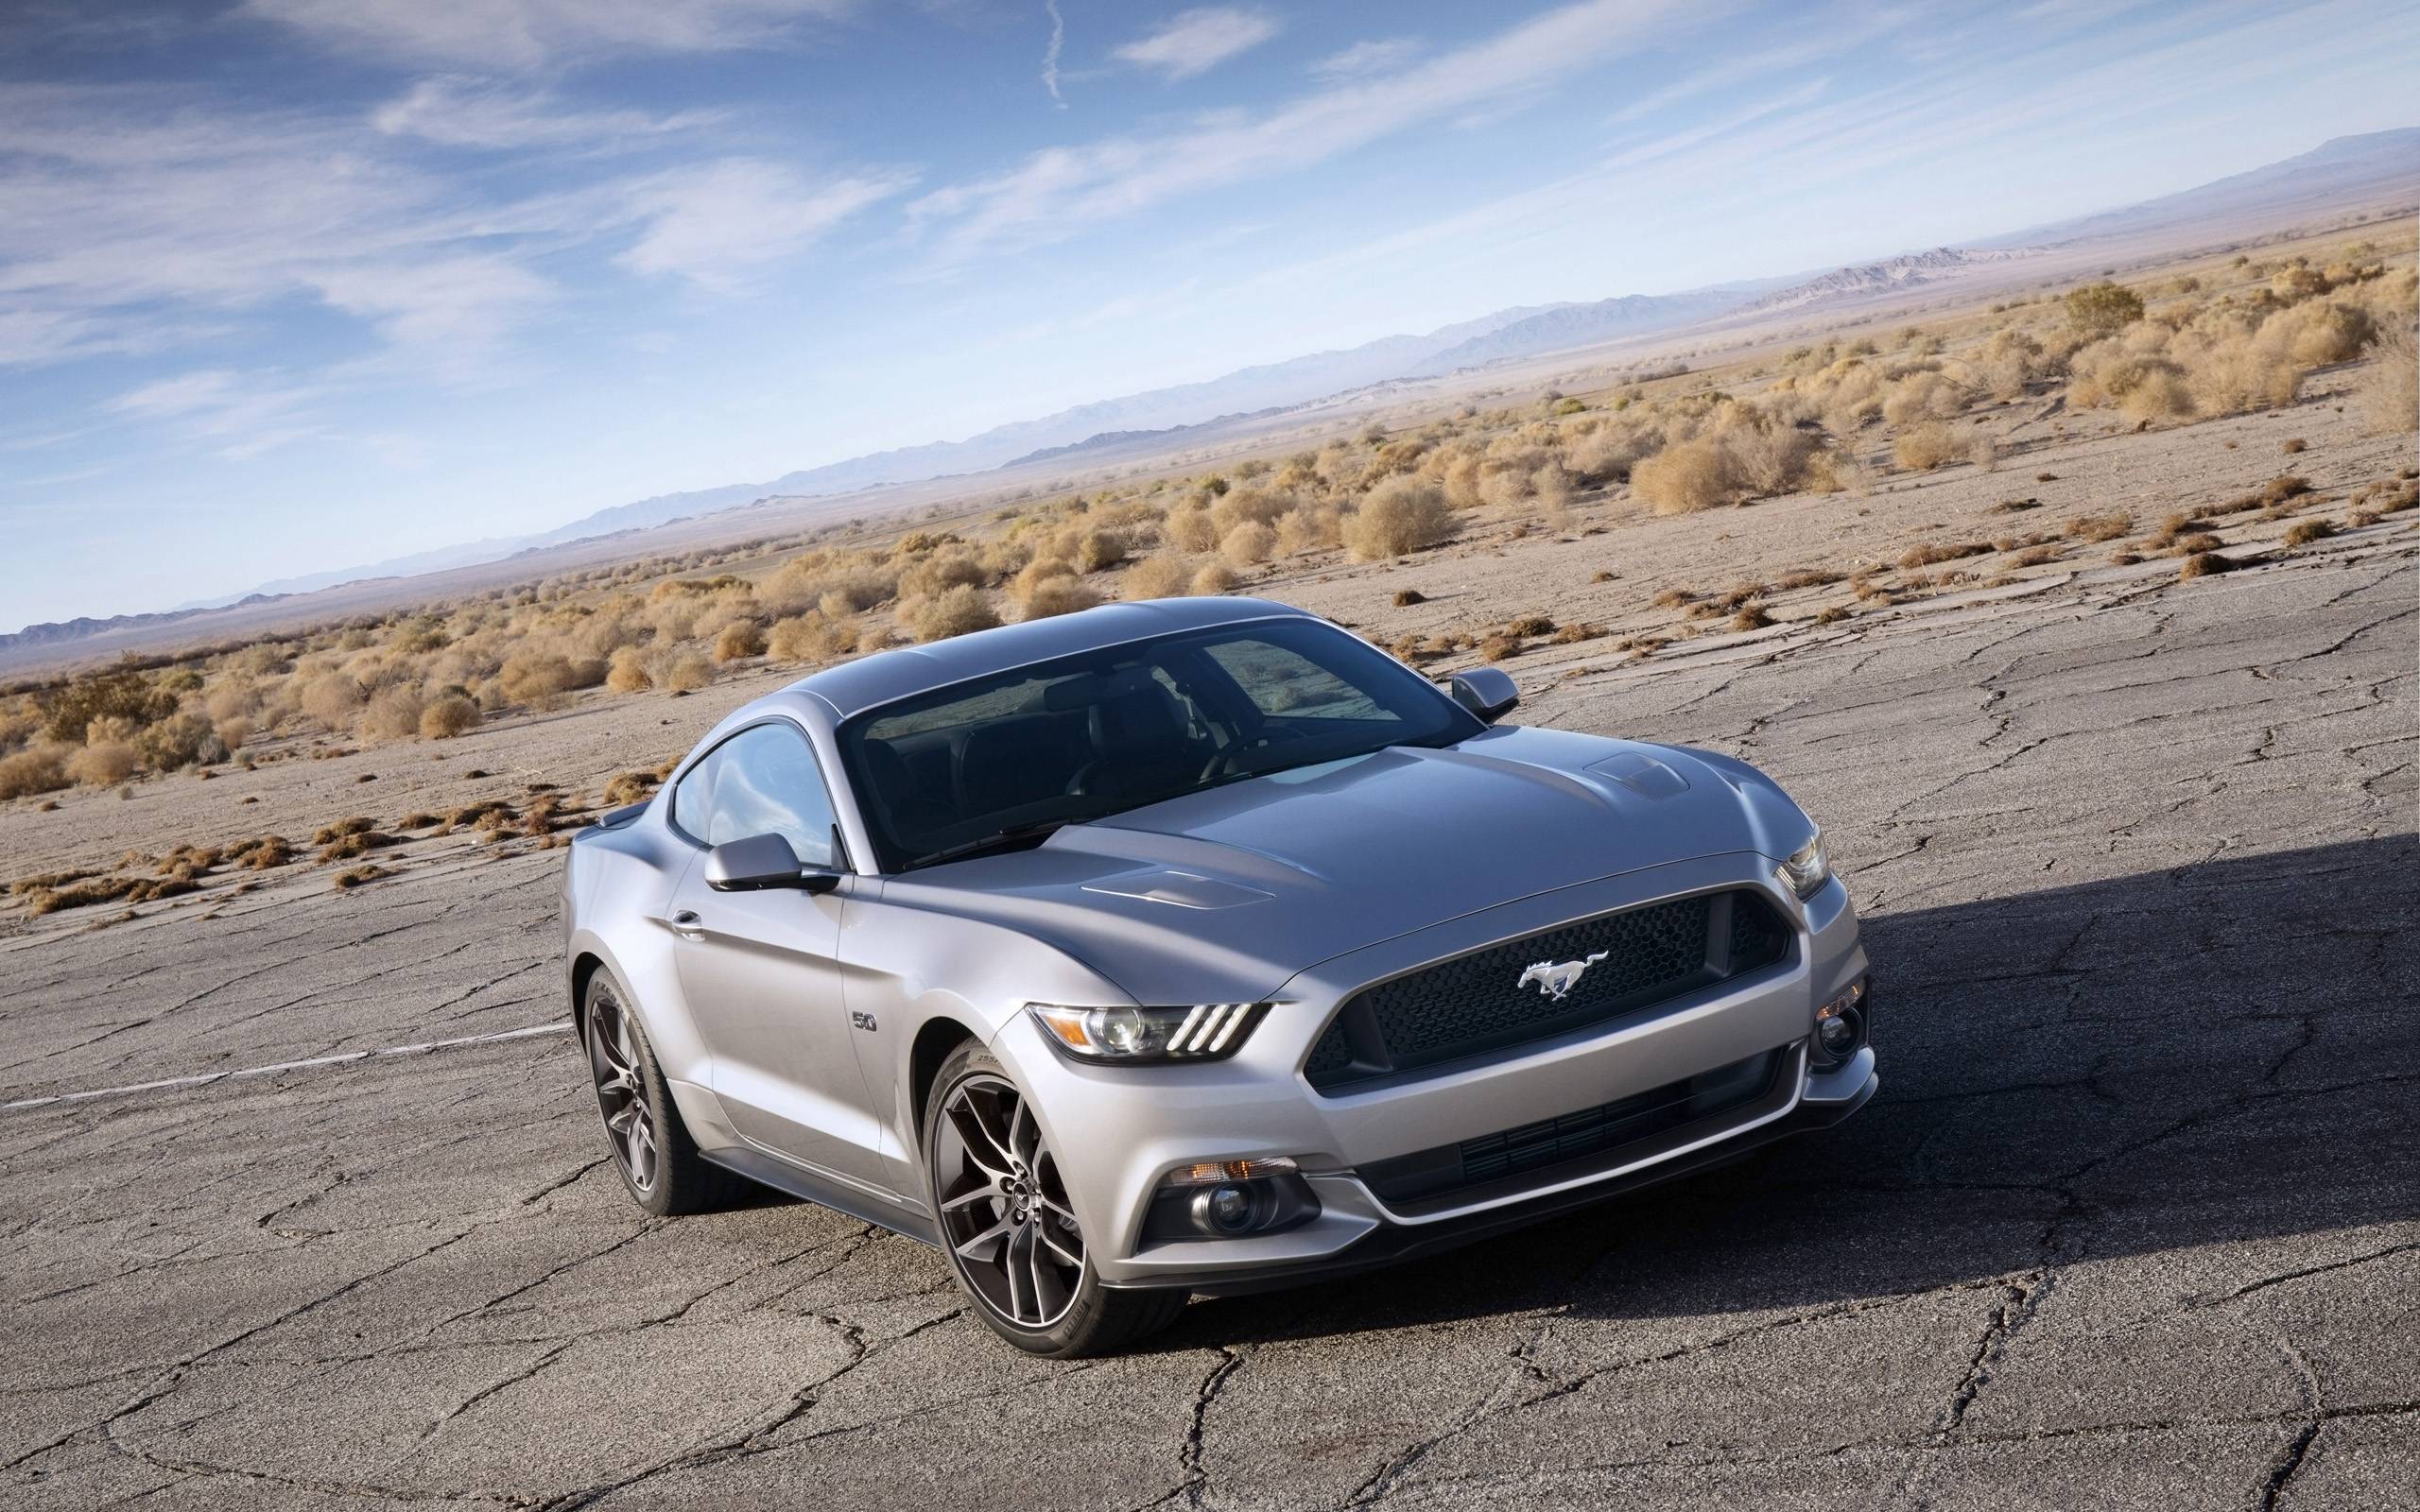 Ford Mustang Car Wallpaper 2560x1600 px ID 53